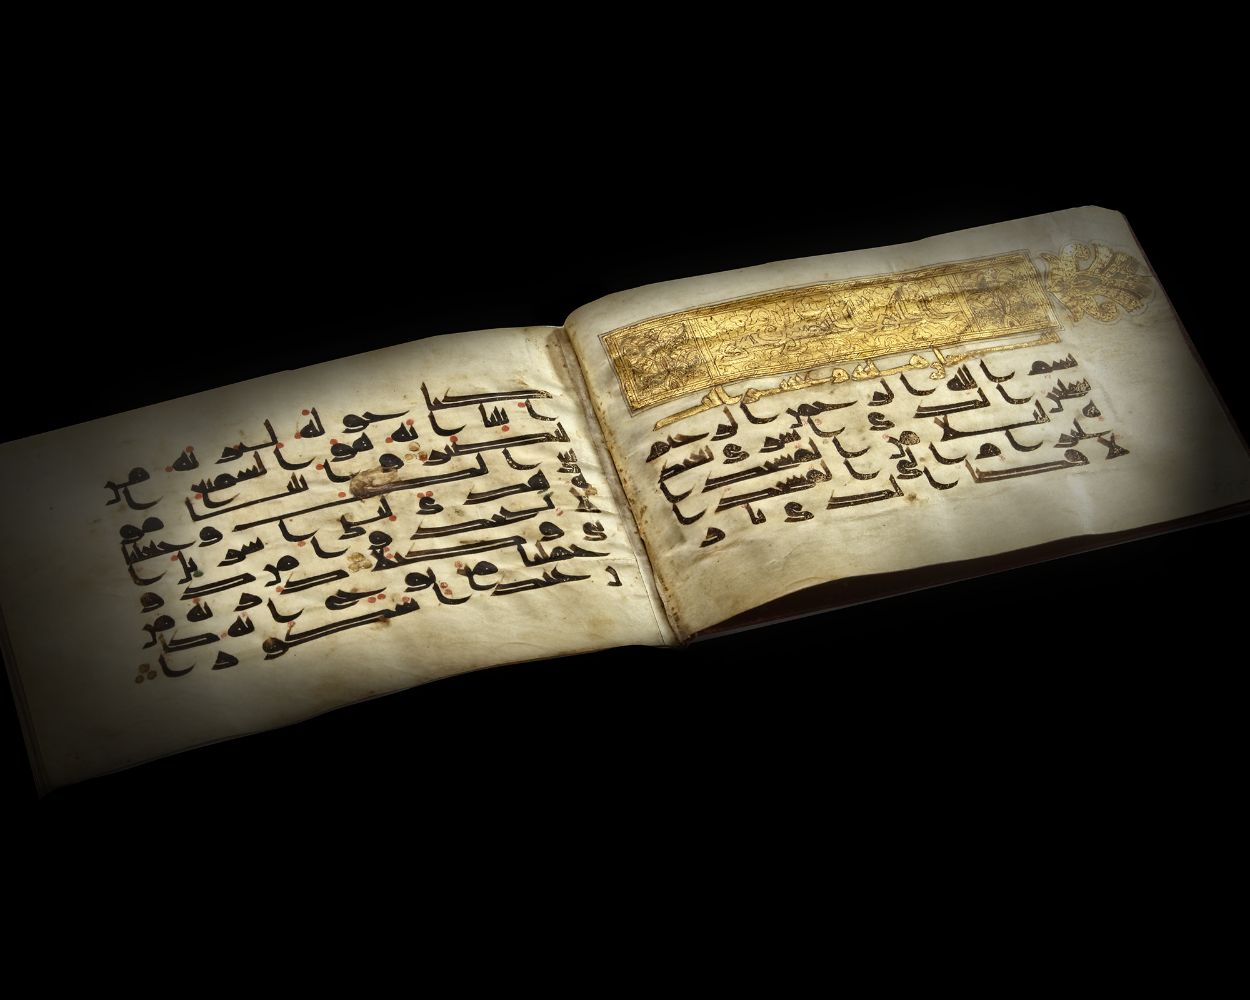 THE QURAN, THE ART OF HAJJ AND ISLAMIC ART AUCTION 2022